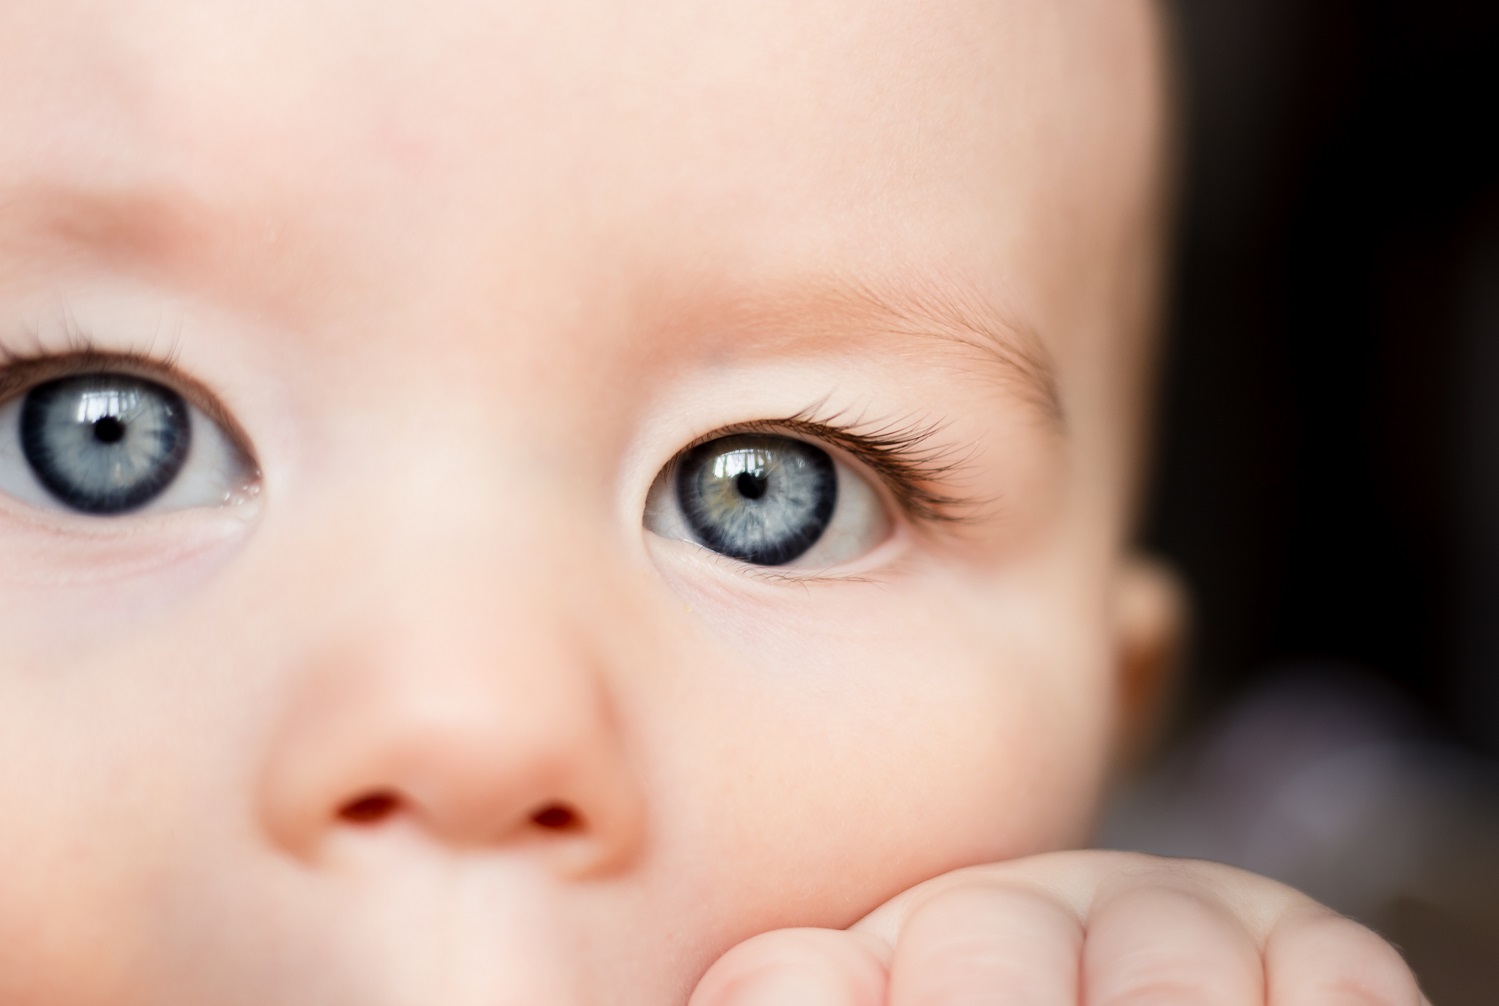 eye color chart what color eyes will my baby have - baby eye color ...